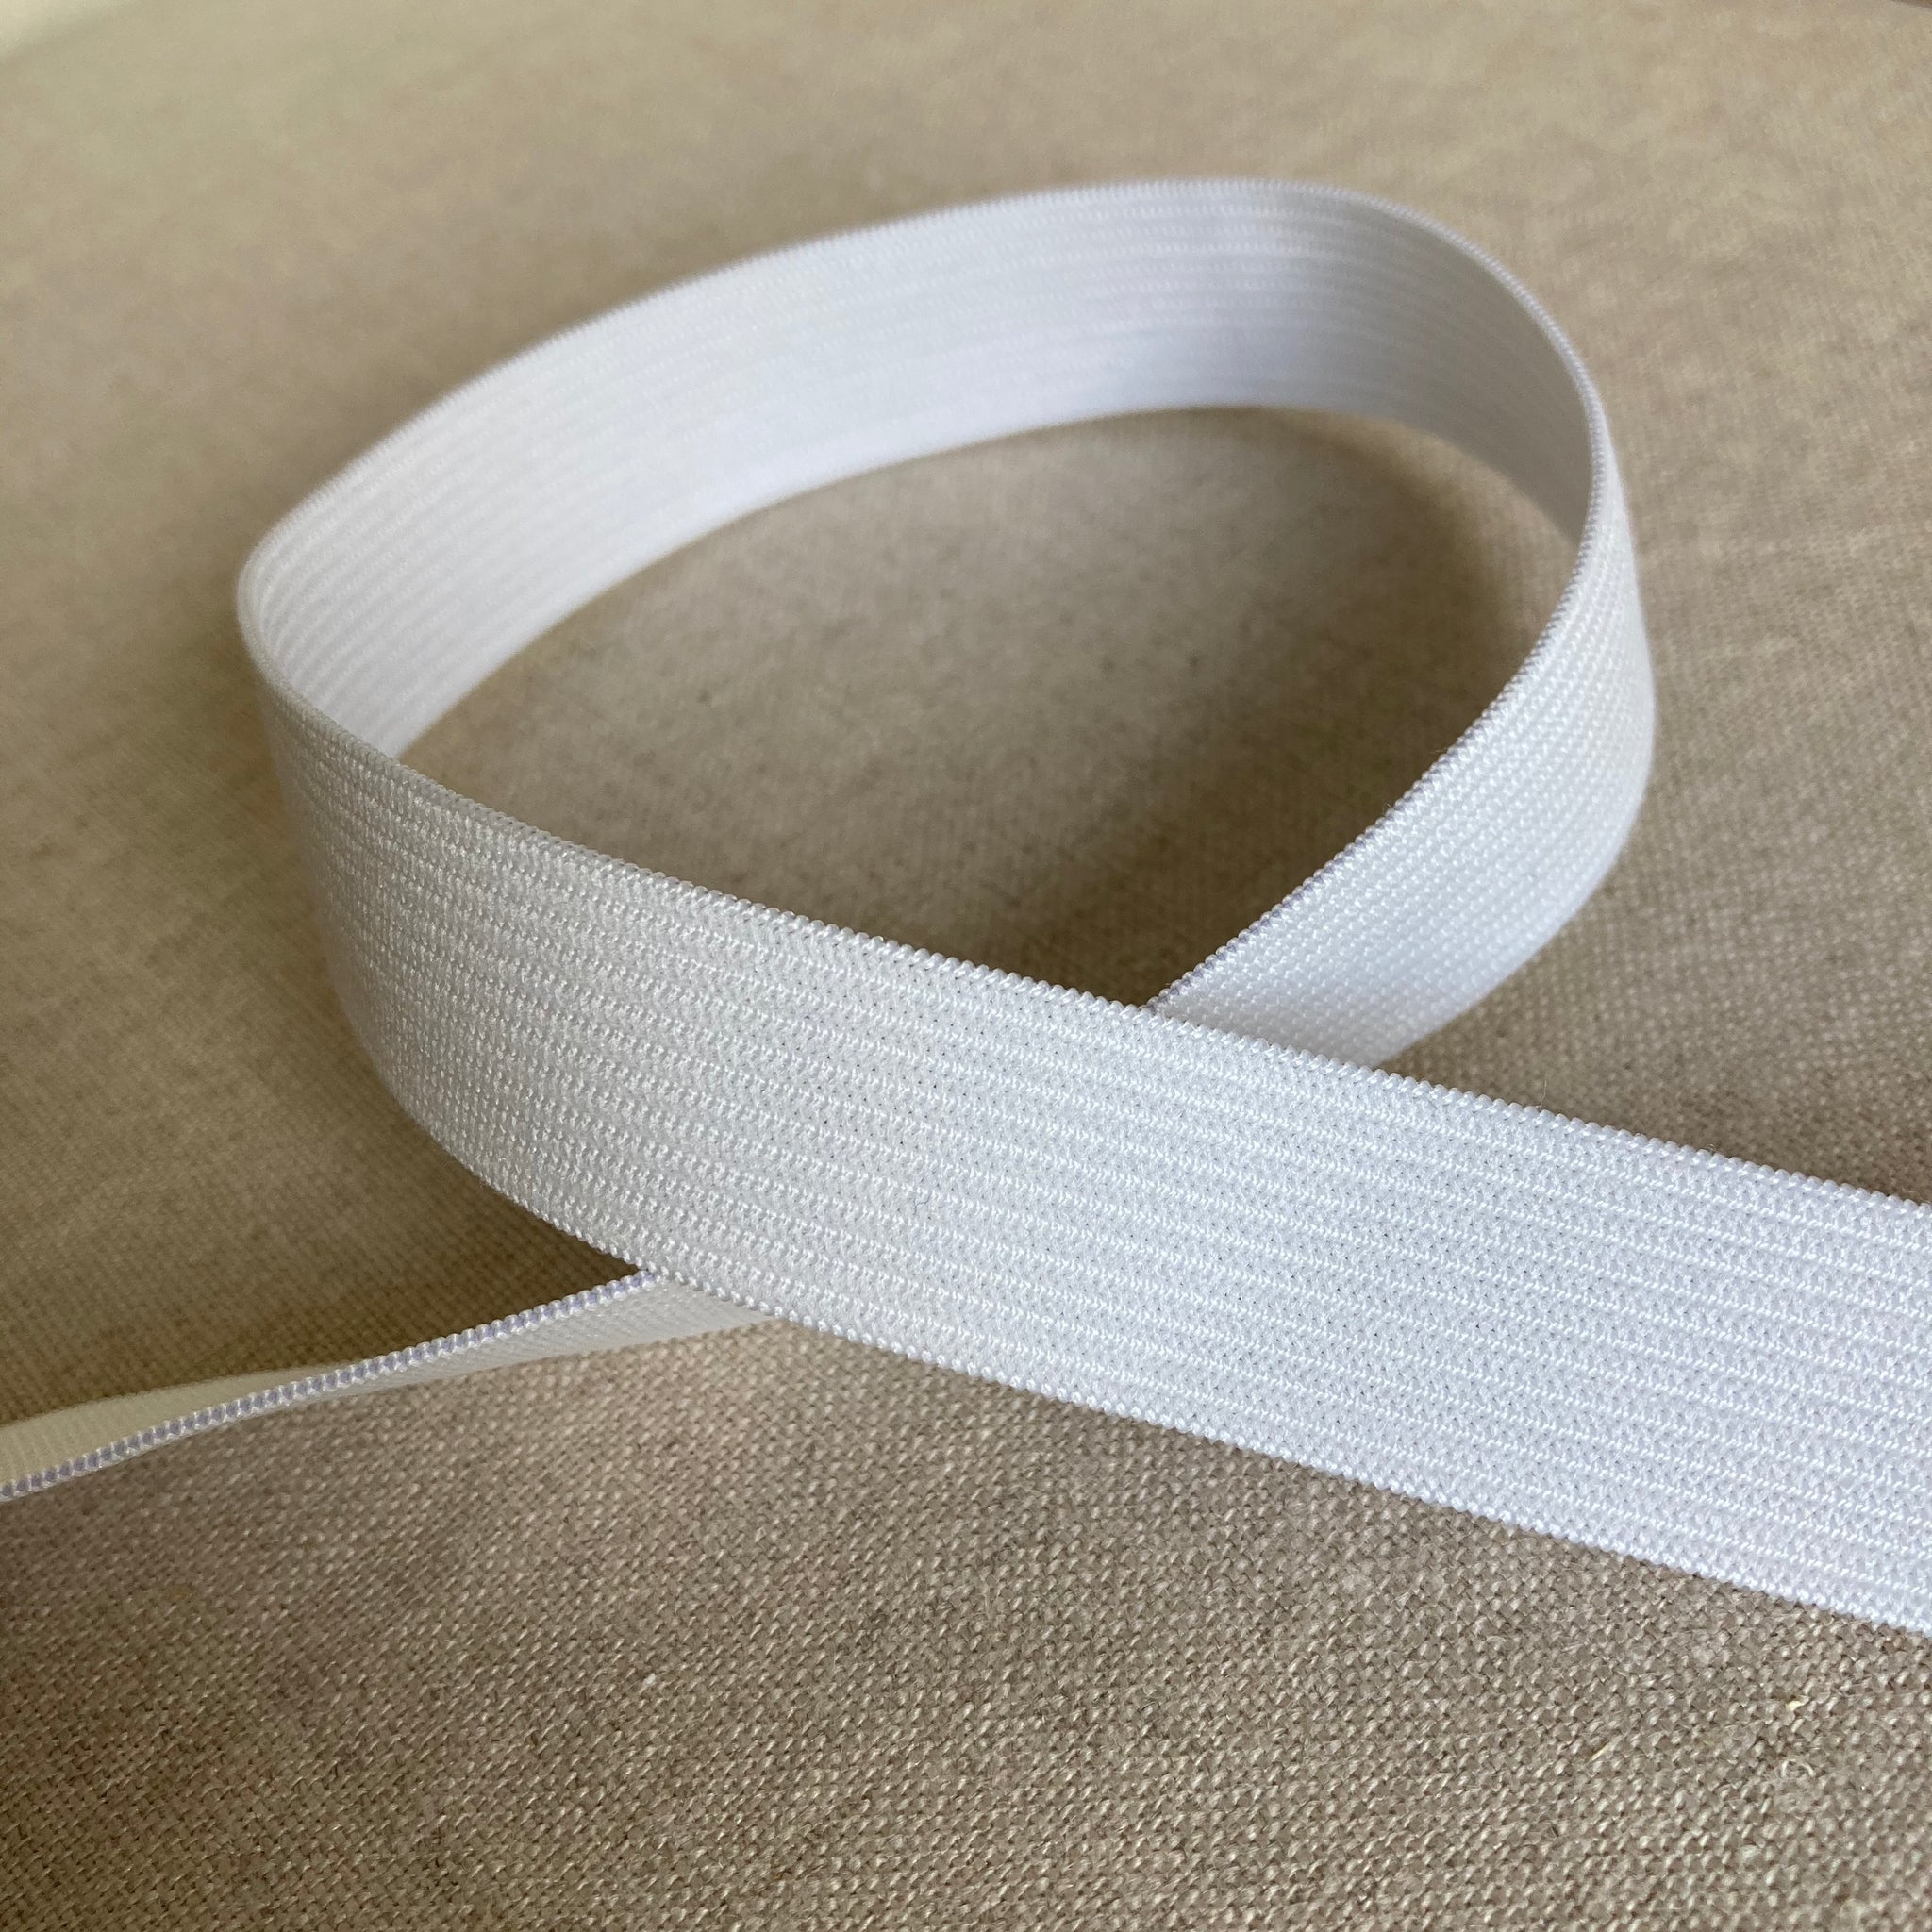 Elastic White Elastic for Sewing Knit Elastic Band (1/2 Inch x 11 Yards)